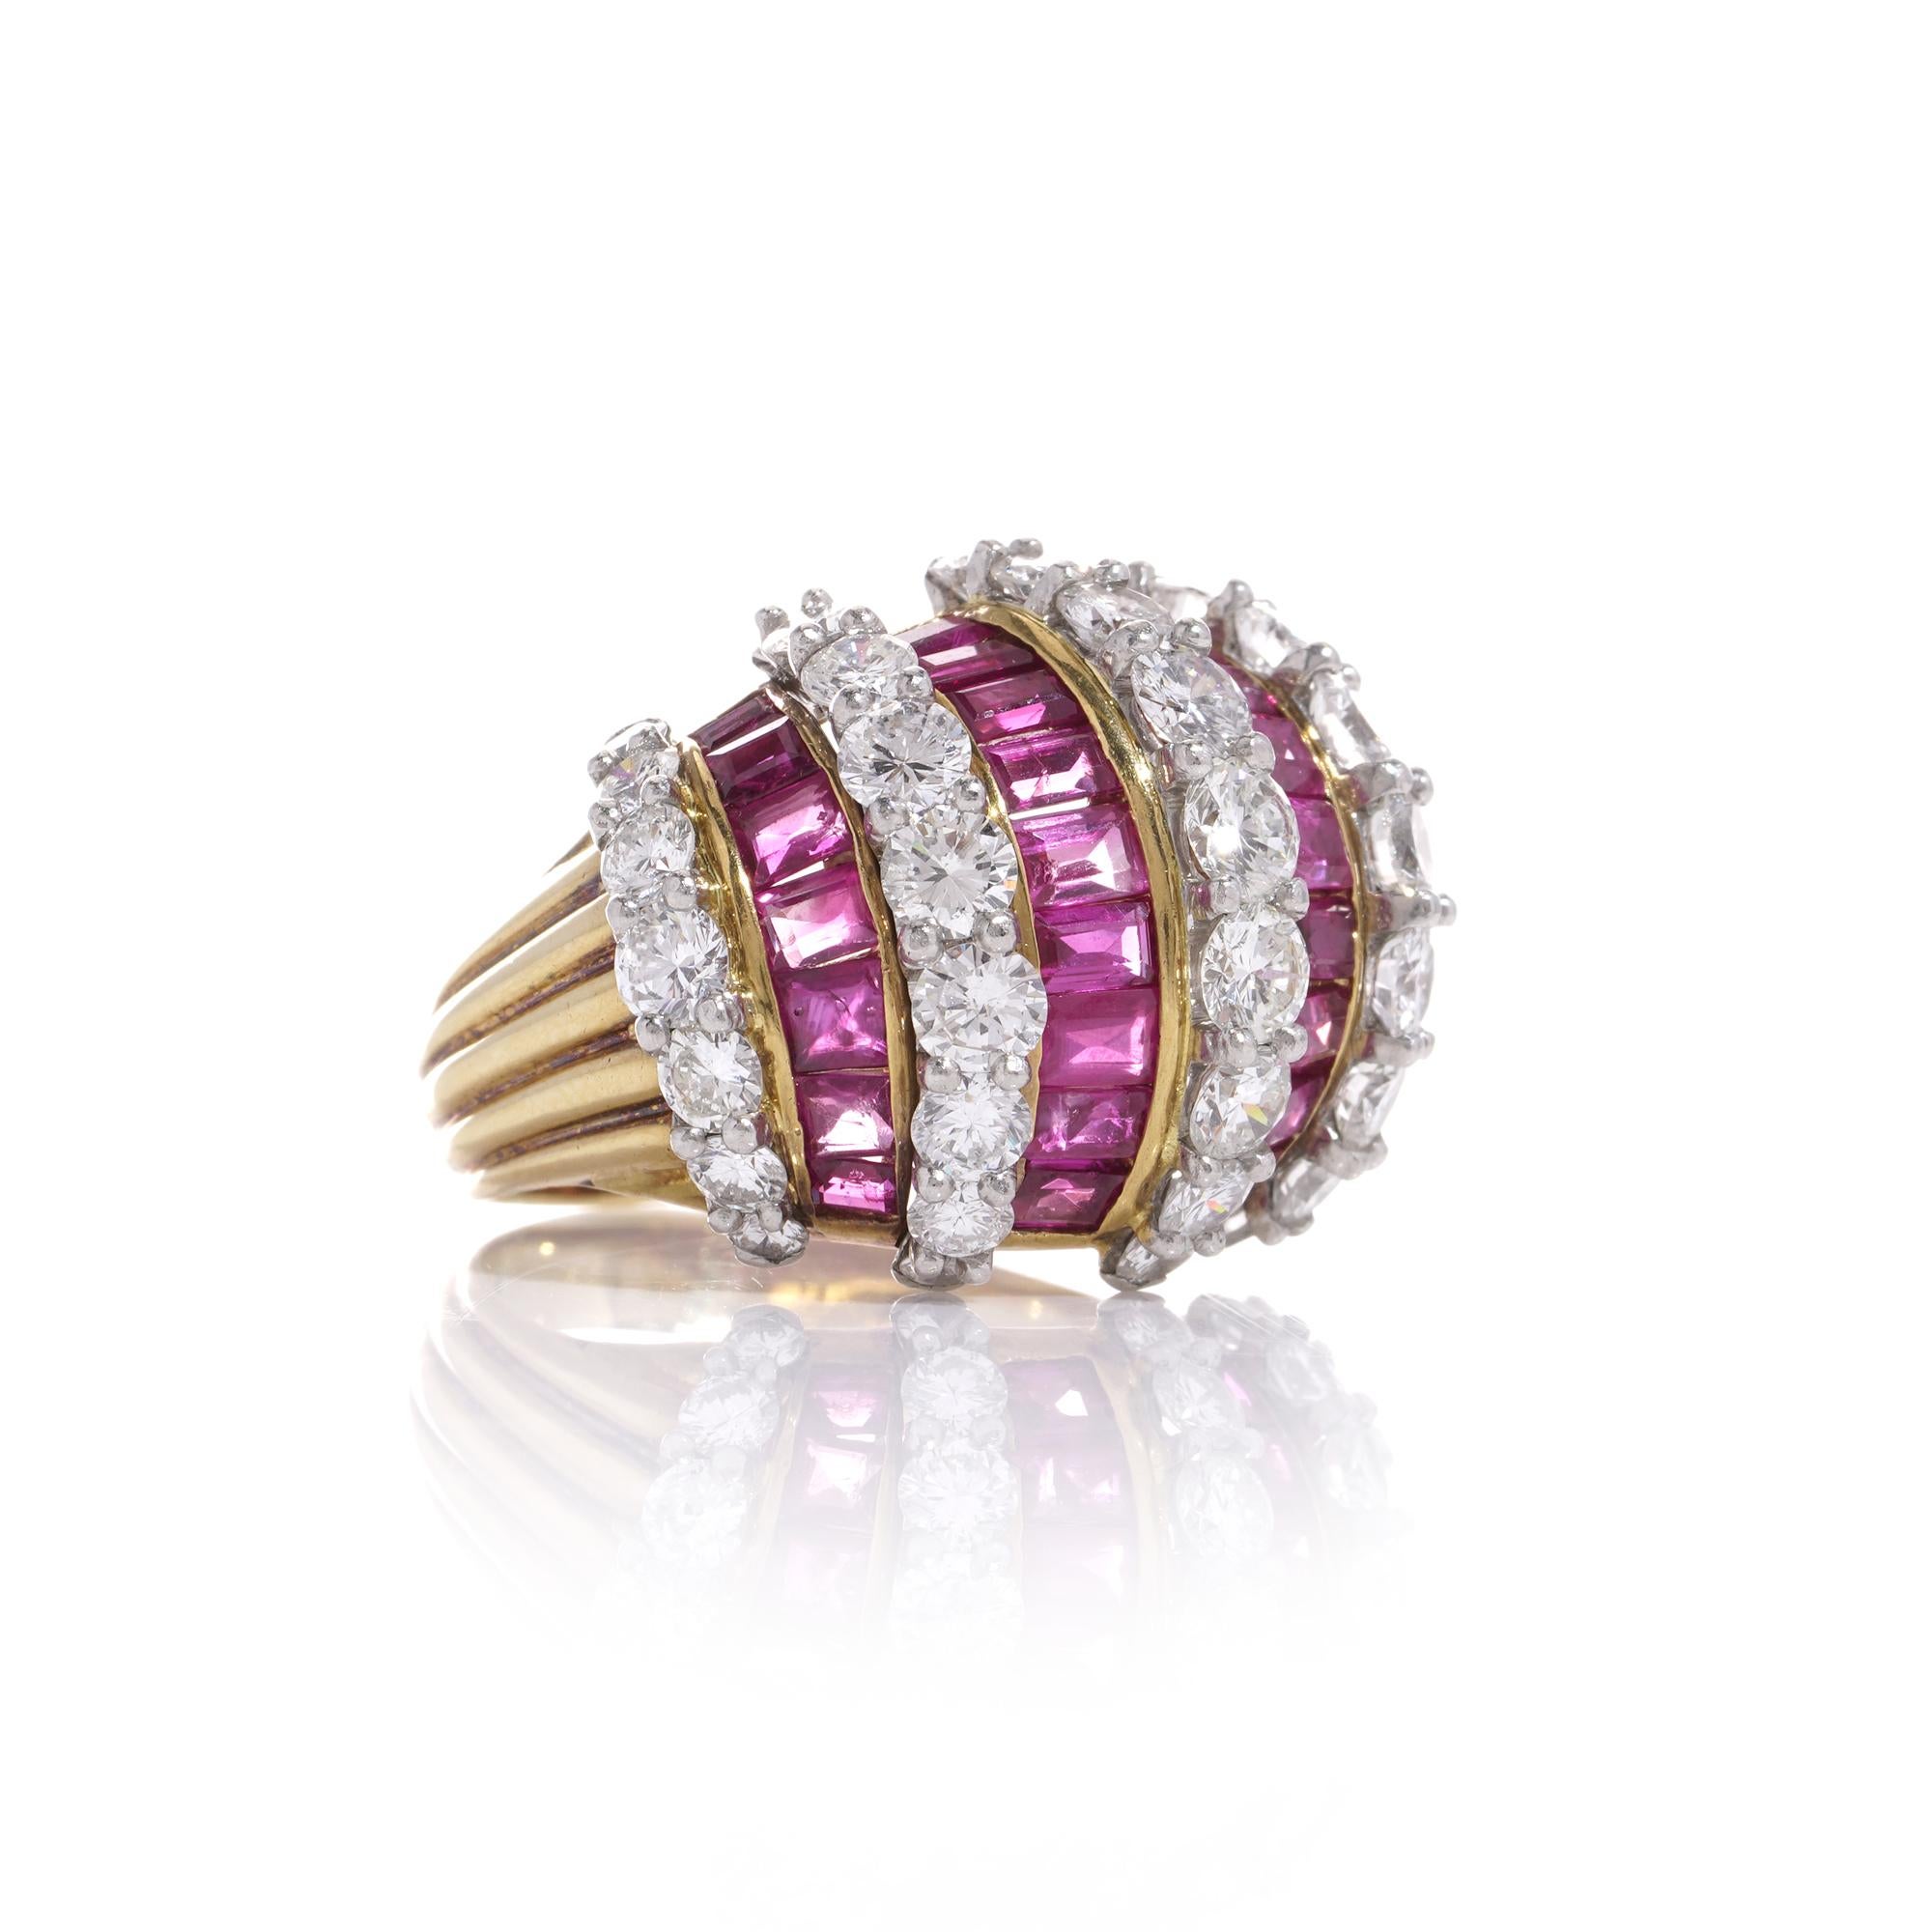 Women's Kutchinsky 18kt. gold ladies dome ring with diamonds and rubies For Sale